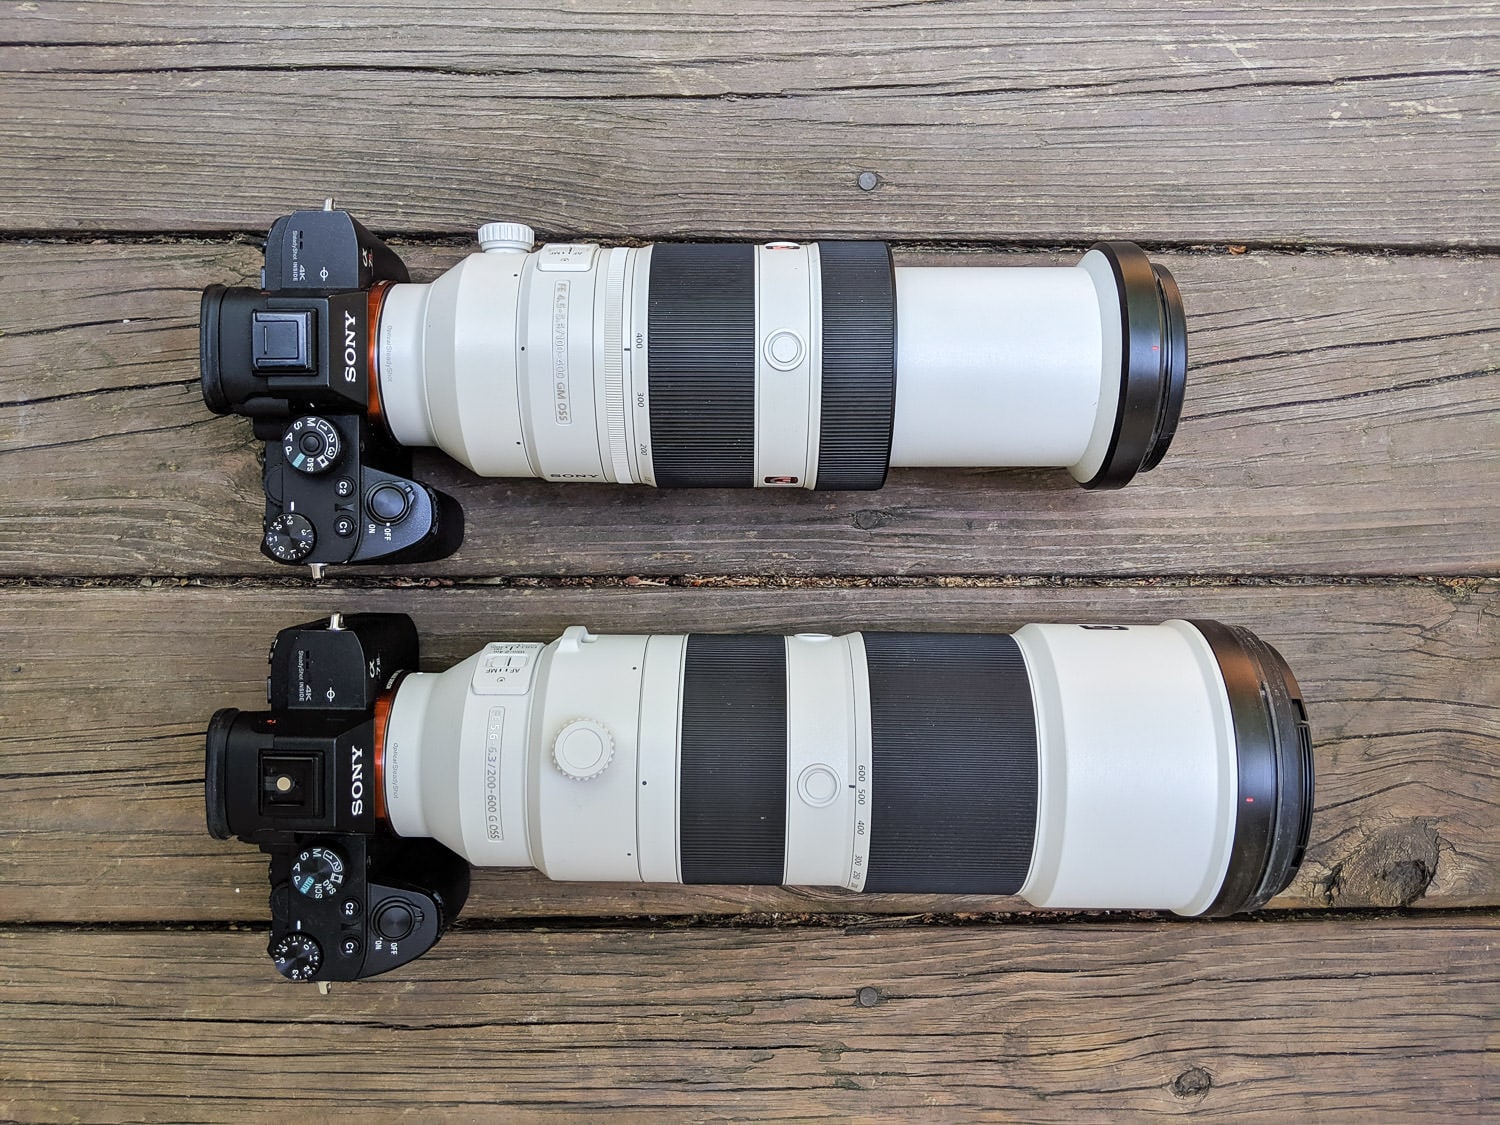 Gear Review: Sony 200-600 f/5.6-6.3 G Telephoto Lens